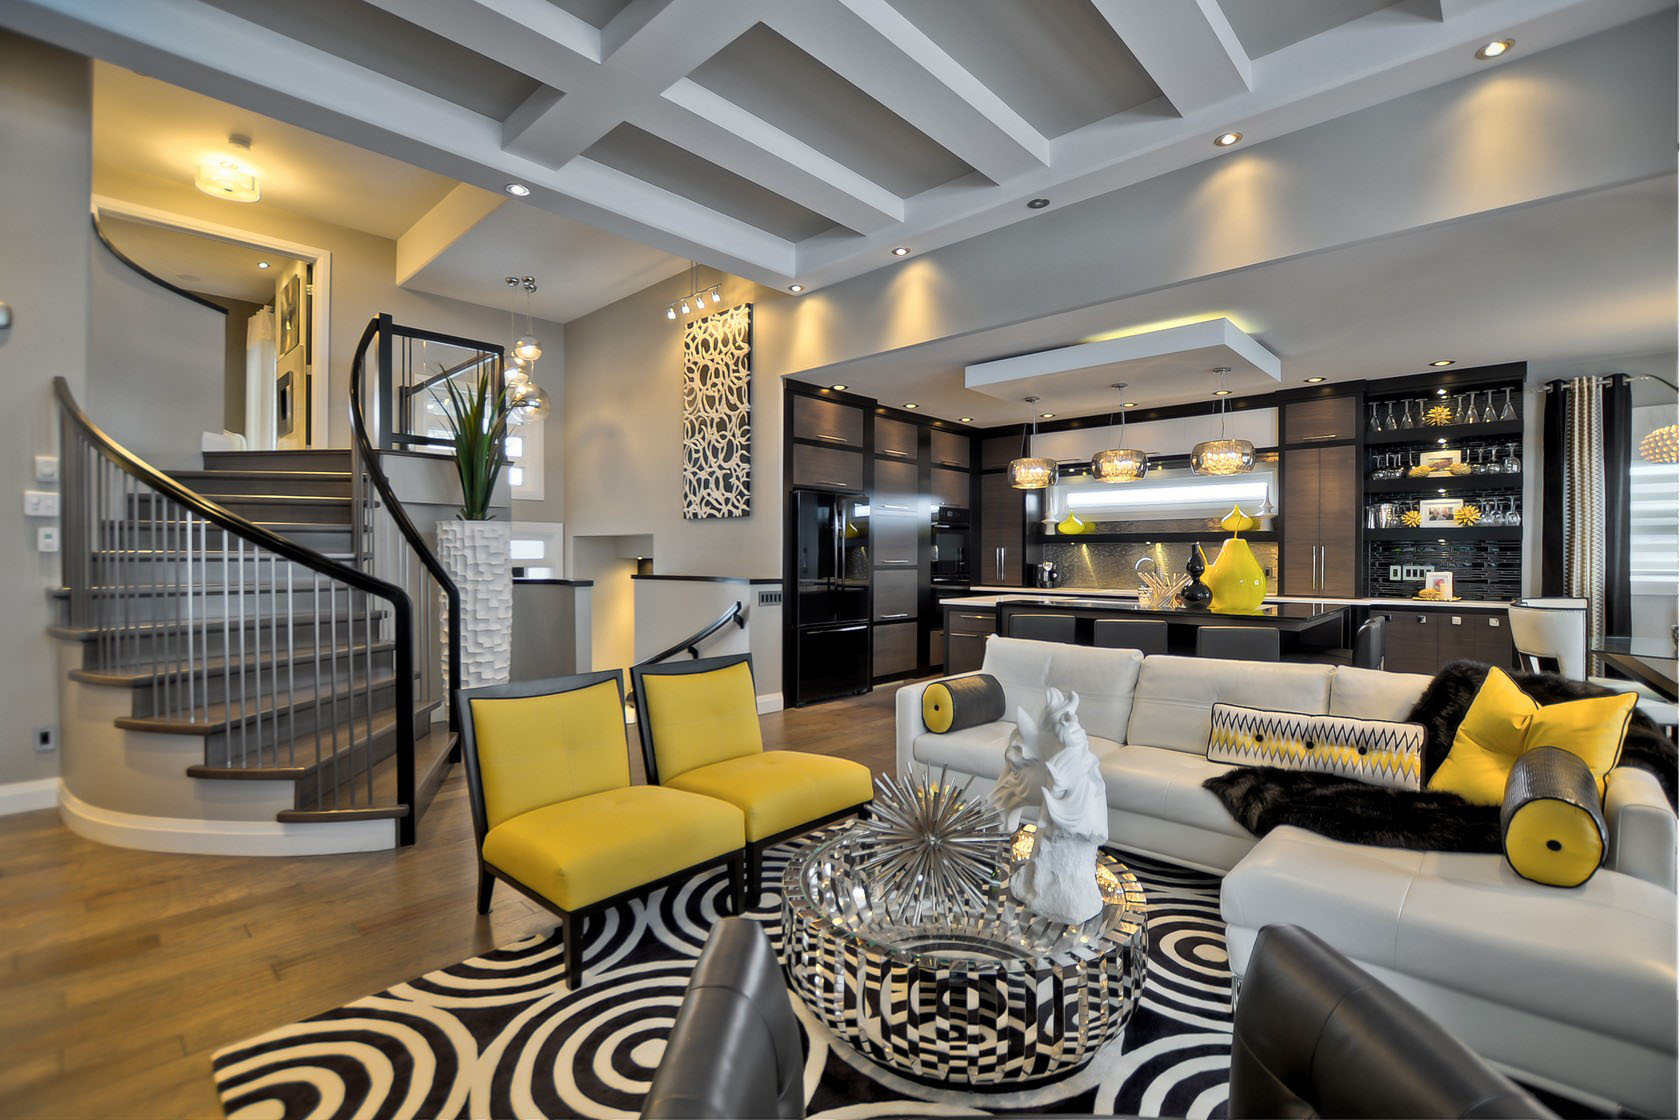 Top 5 Modern Interior Decorating Trends To Watch